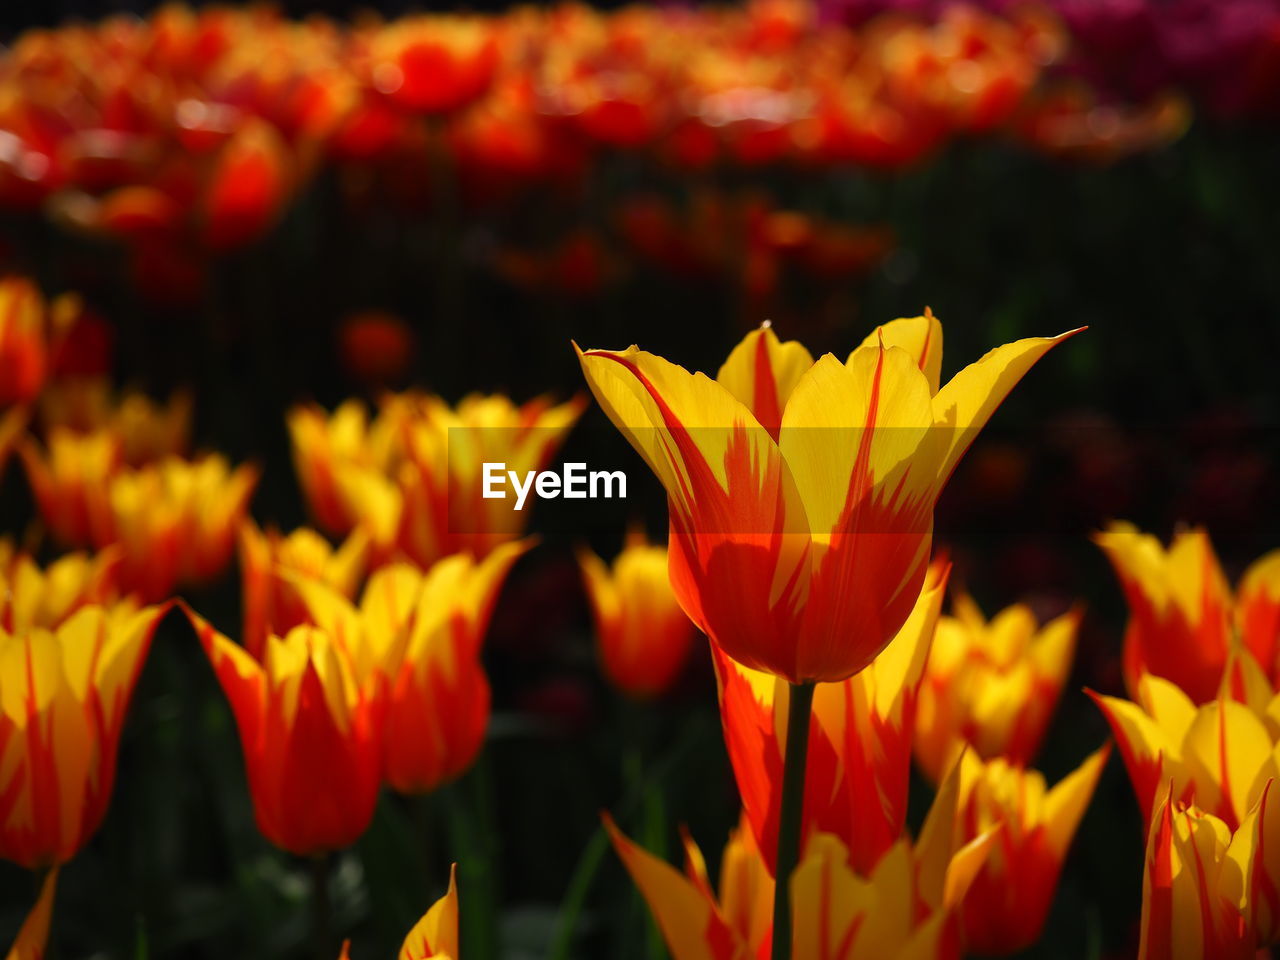 flower, flowering plant, plant, beauty in nature, freshness, petal, nature, yellow, fragility, flower head, close-up, growth, inflorescence, no people, red, macro photography, focus on foreground, outdoors, tulip, botany, flowerbed, blossom, leaf, vibrant color, springtime, plant part, ornamental garden, sunlight, garden, day